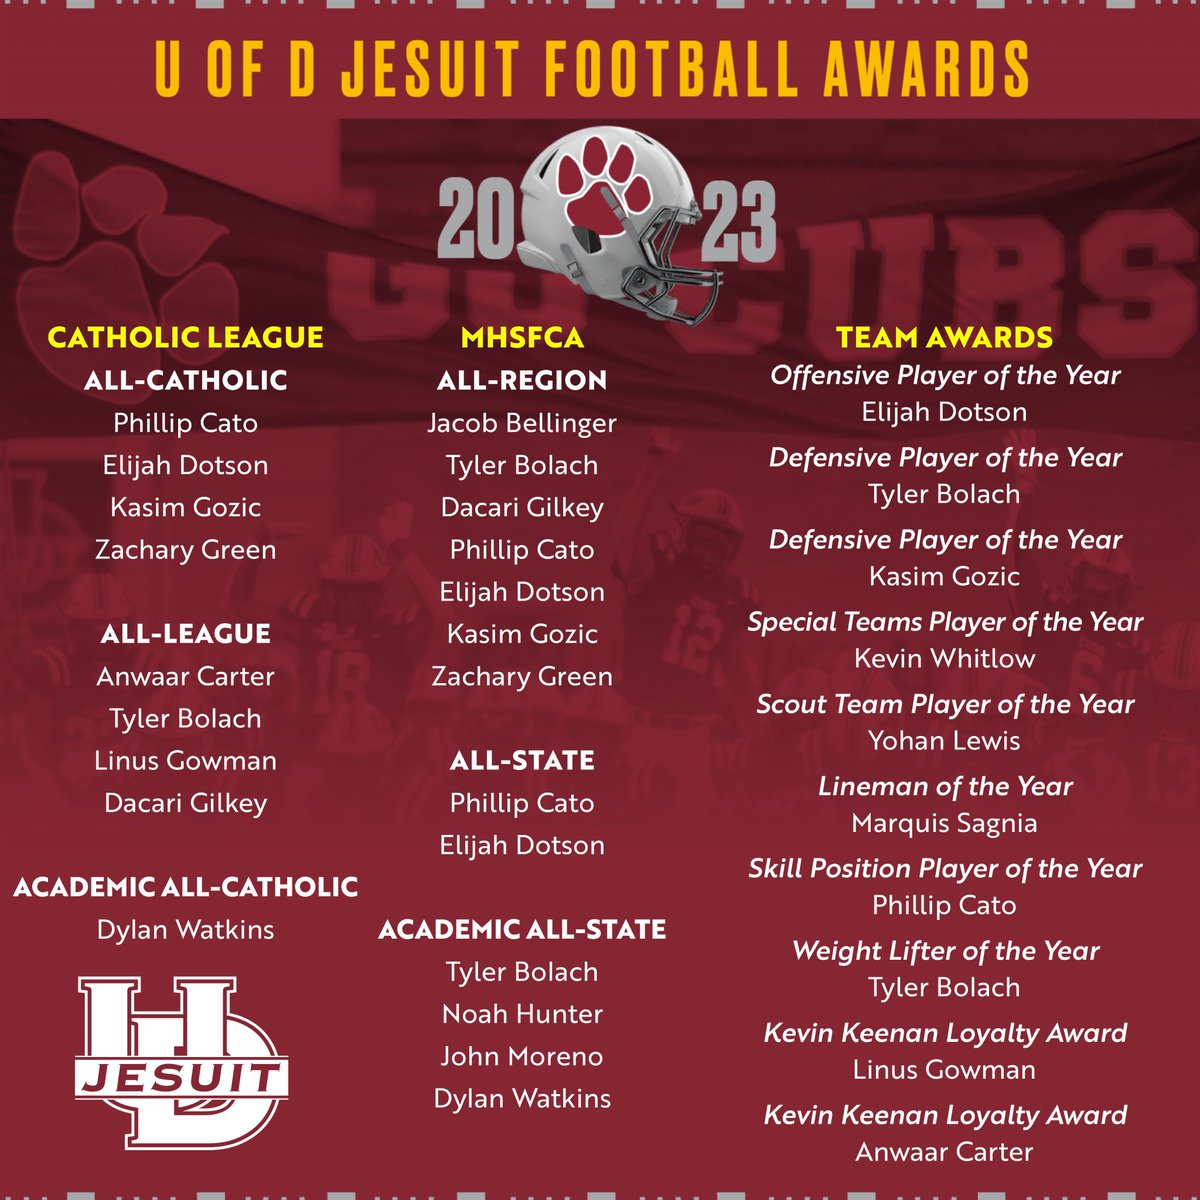 Congratulations to the Cub varsity football players who earned season-end honors! We take pride in your outstanding efforts both in the classroom and on the gridiron. Go Cubs! @uofdjesuitfootball #UofDJesuit #UofDJesuitFootball #UofDJesuitAthletics #StudentAthletes #MenForOthers